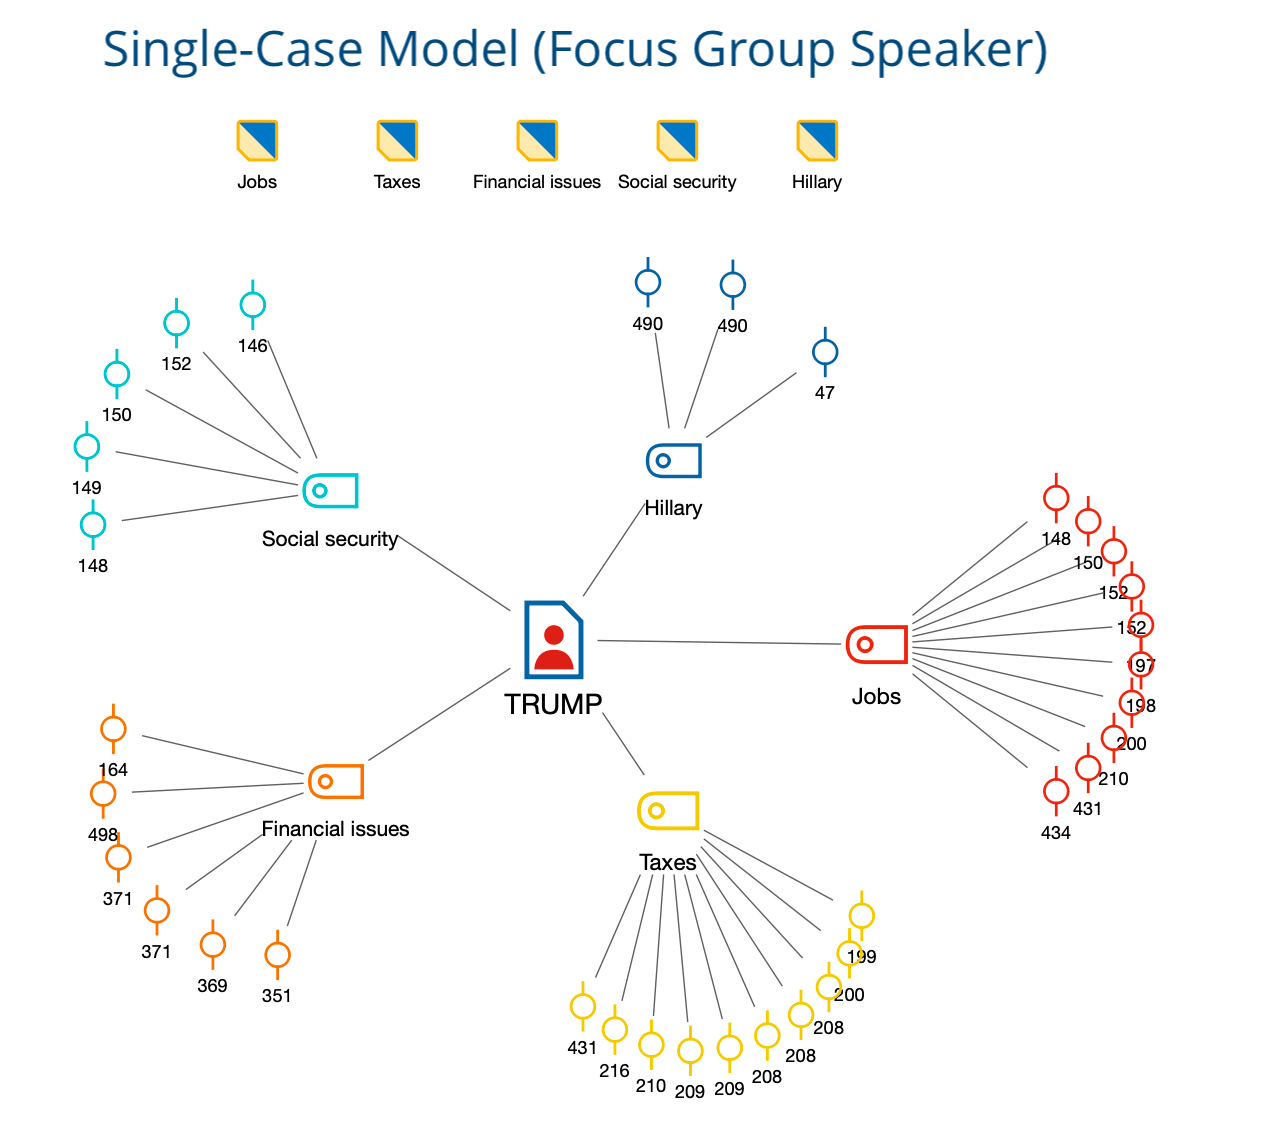 Example for a Single-Case Model for Focus Group Participants